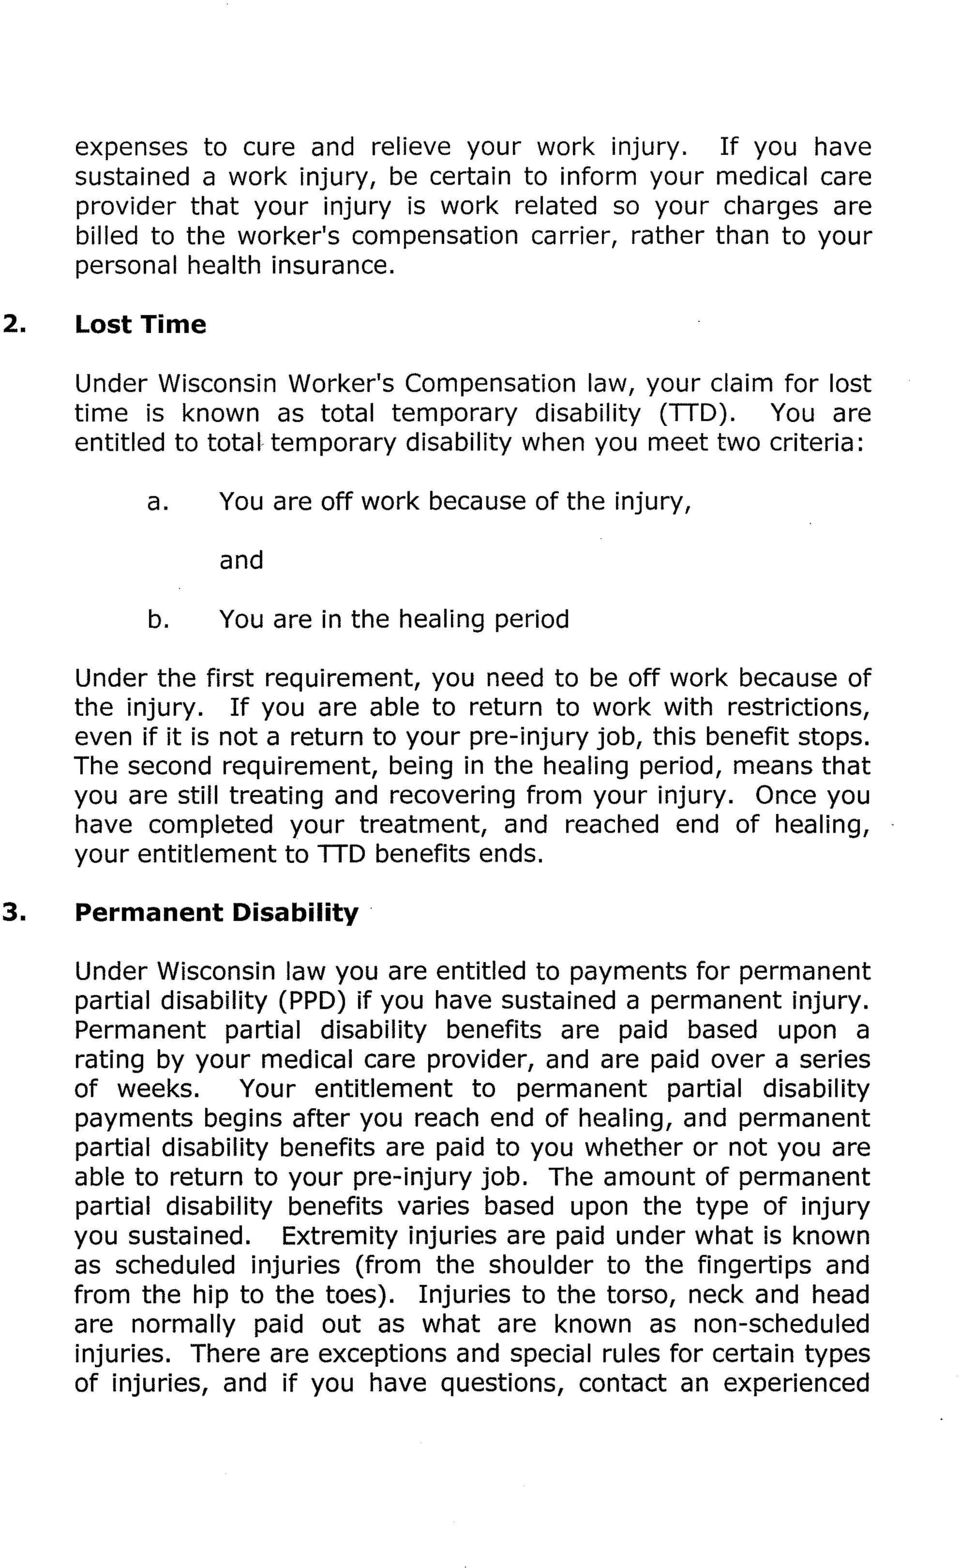 your personal health insurance. 2. Lost Time Under Wisconsin Worker's Compensation law, your claim for lost time is known as total temporary disability (TID).